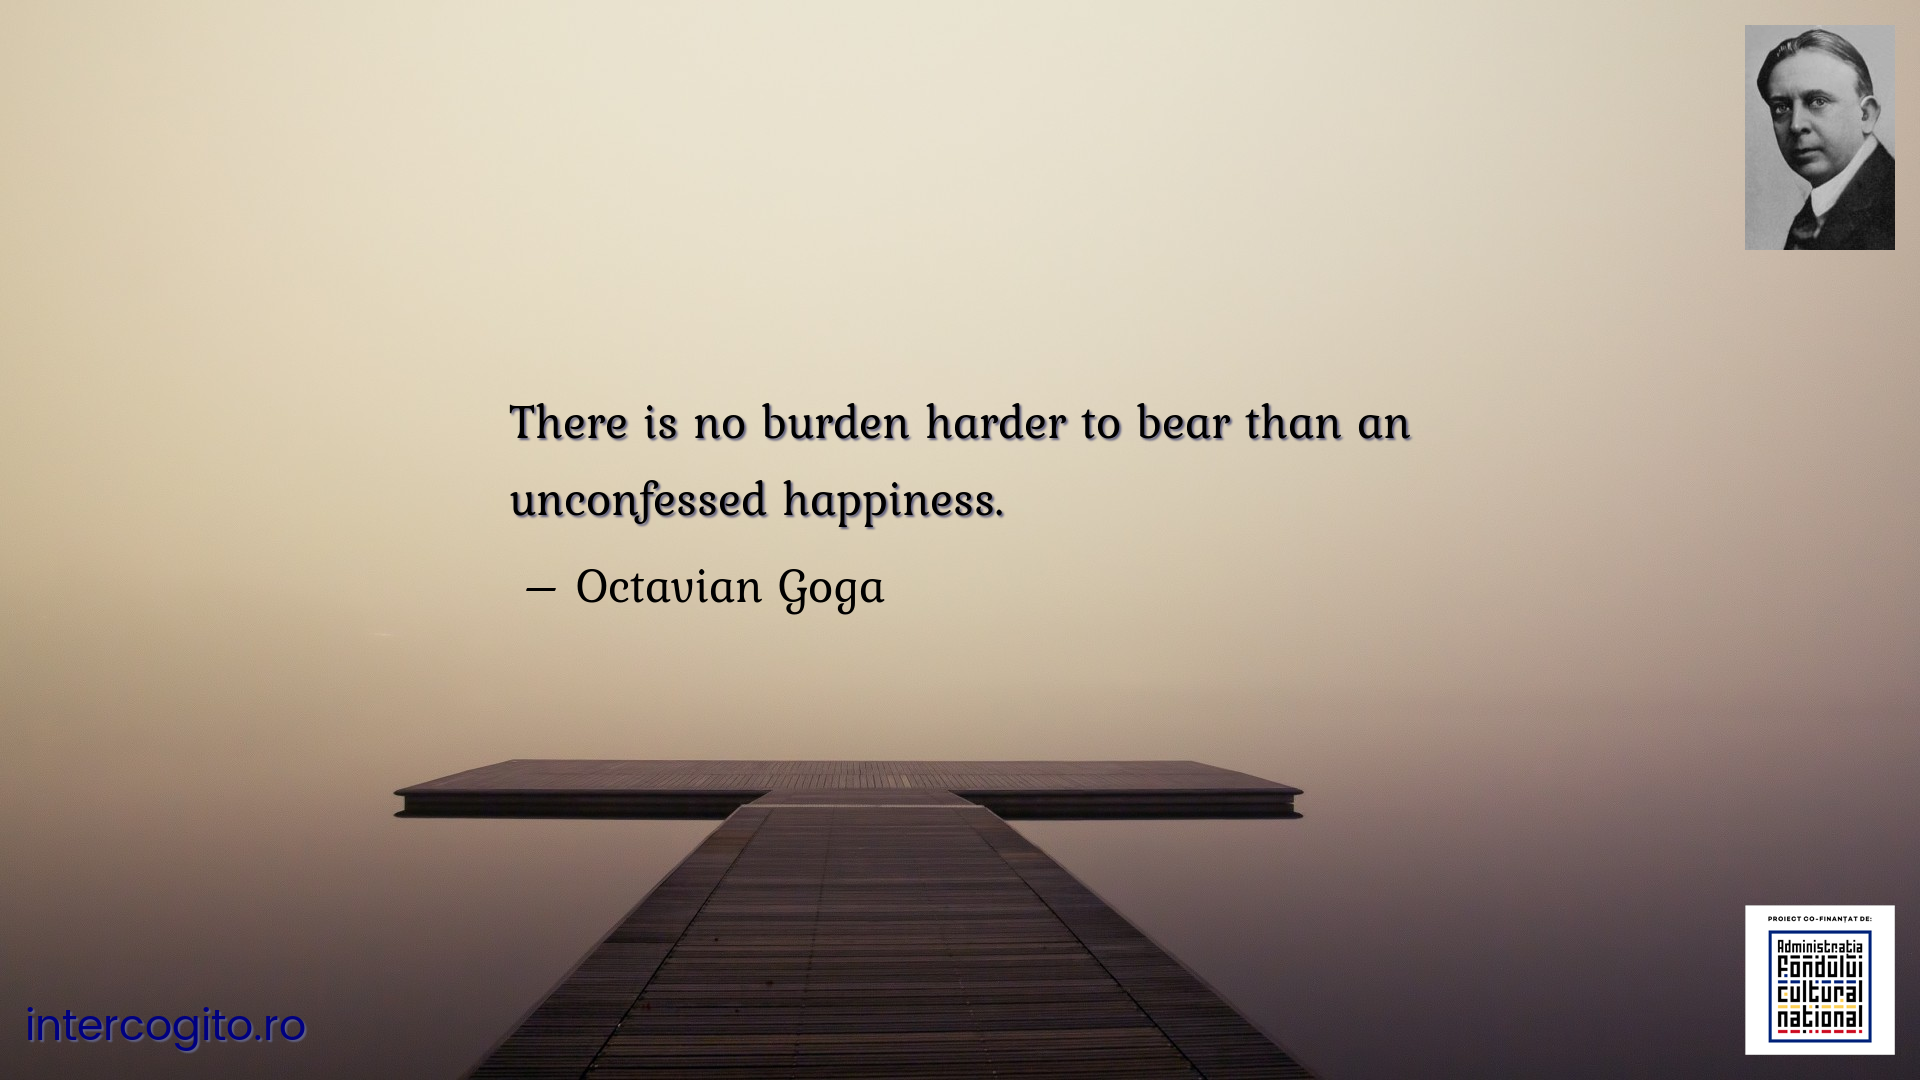 There is no burden harder to bear than an unconfessed happiness.